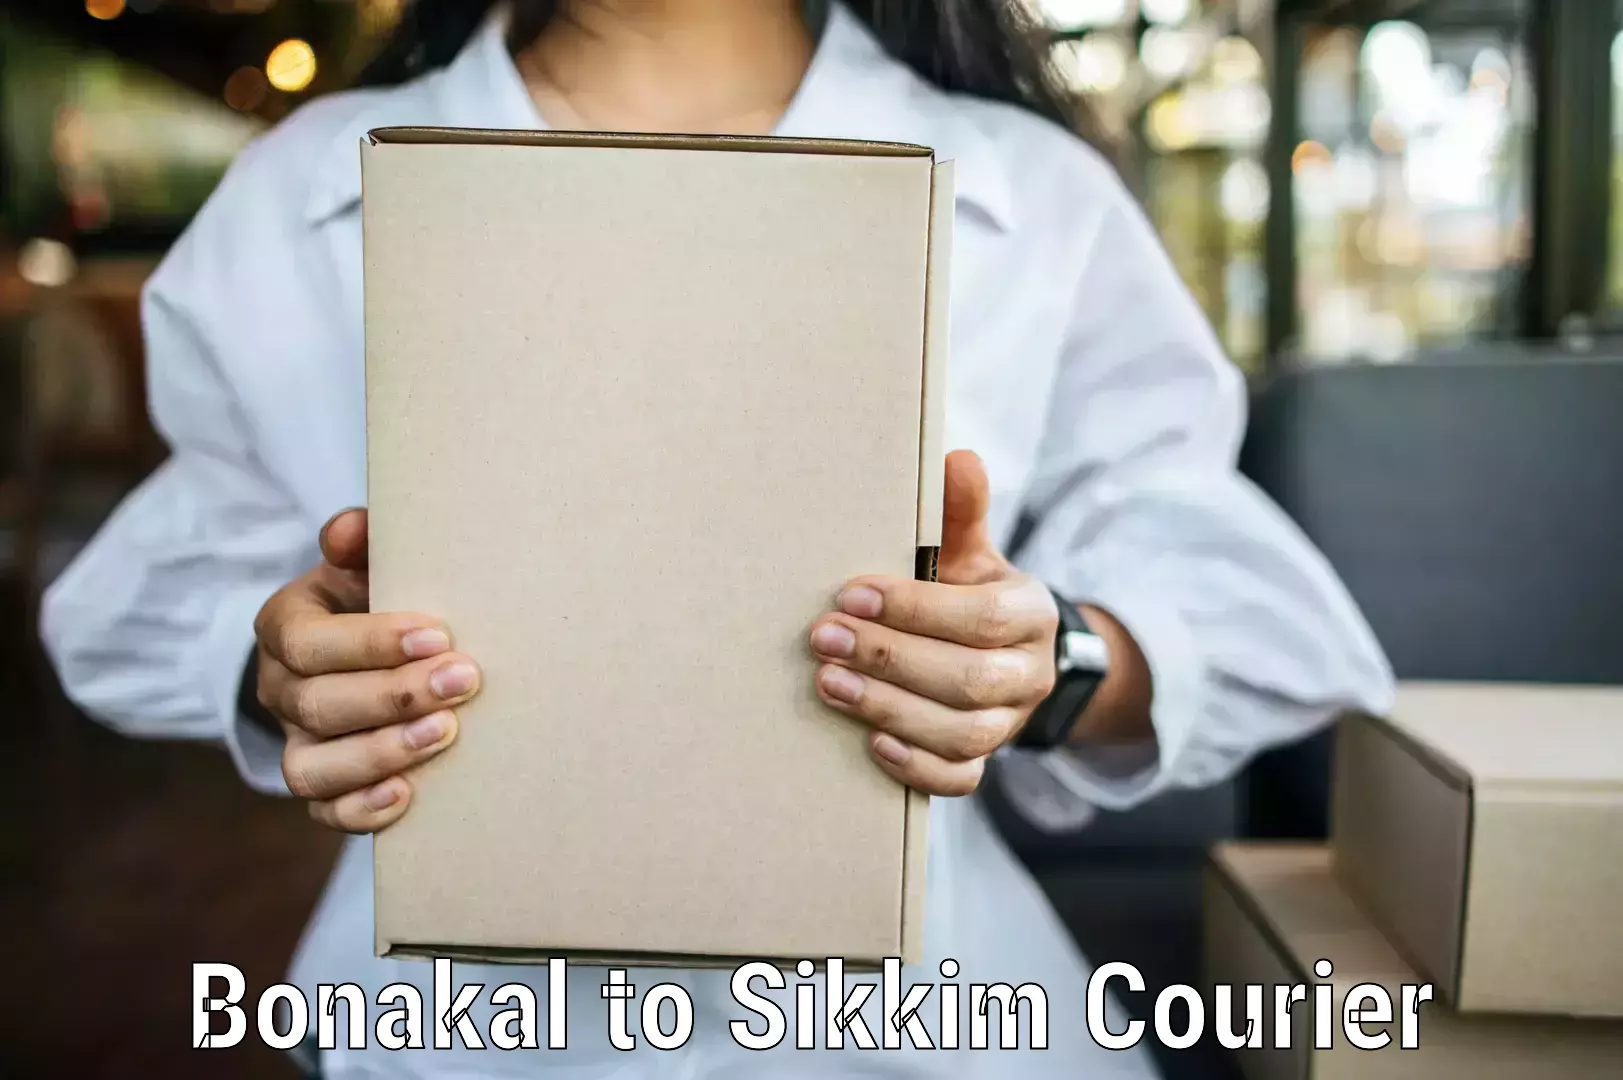 State-of-the-art courier technology Bonakal to Mangan